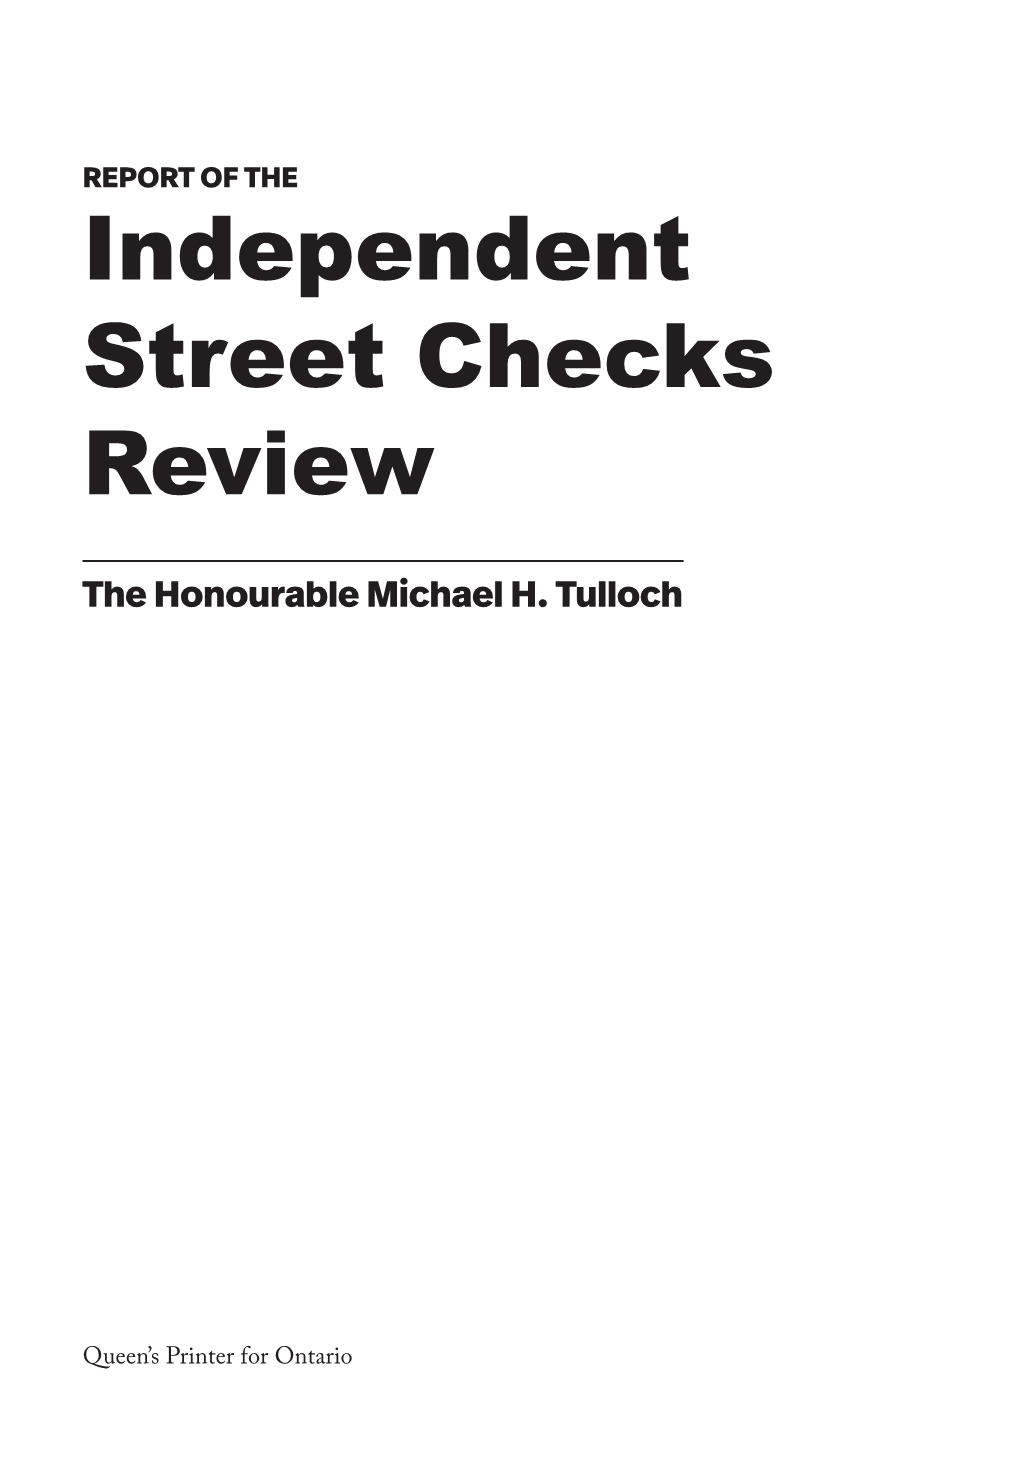 Independent Street Checks Review